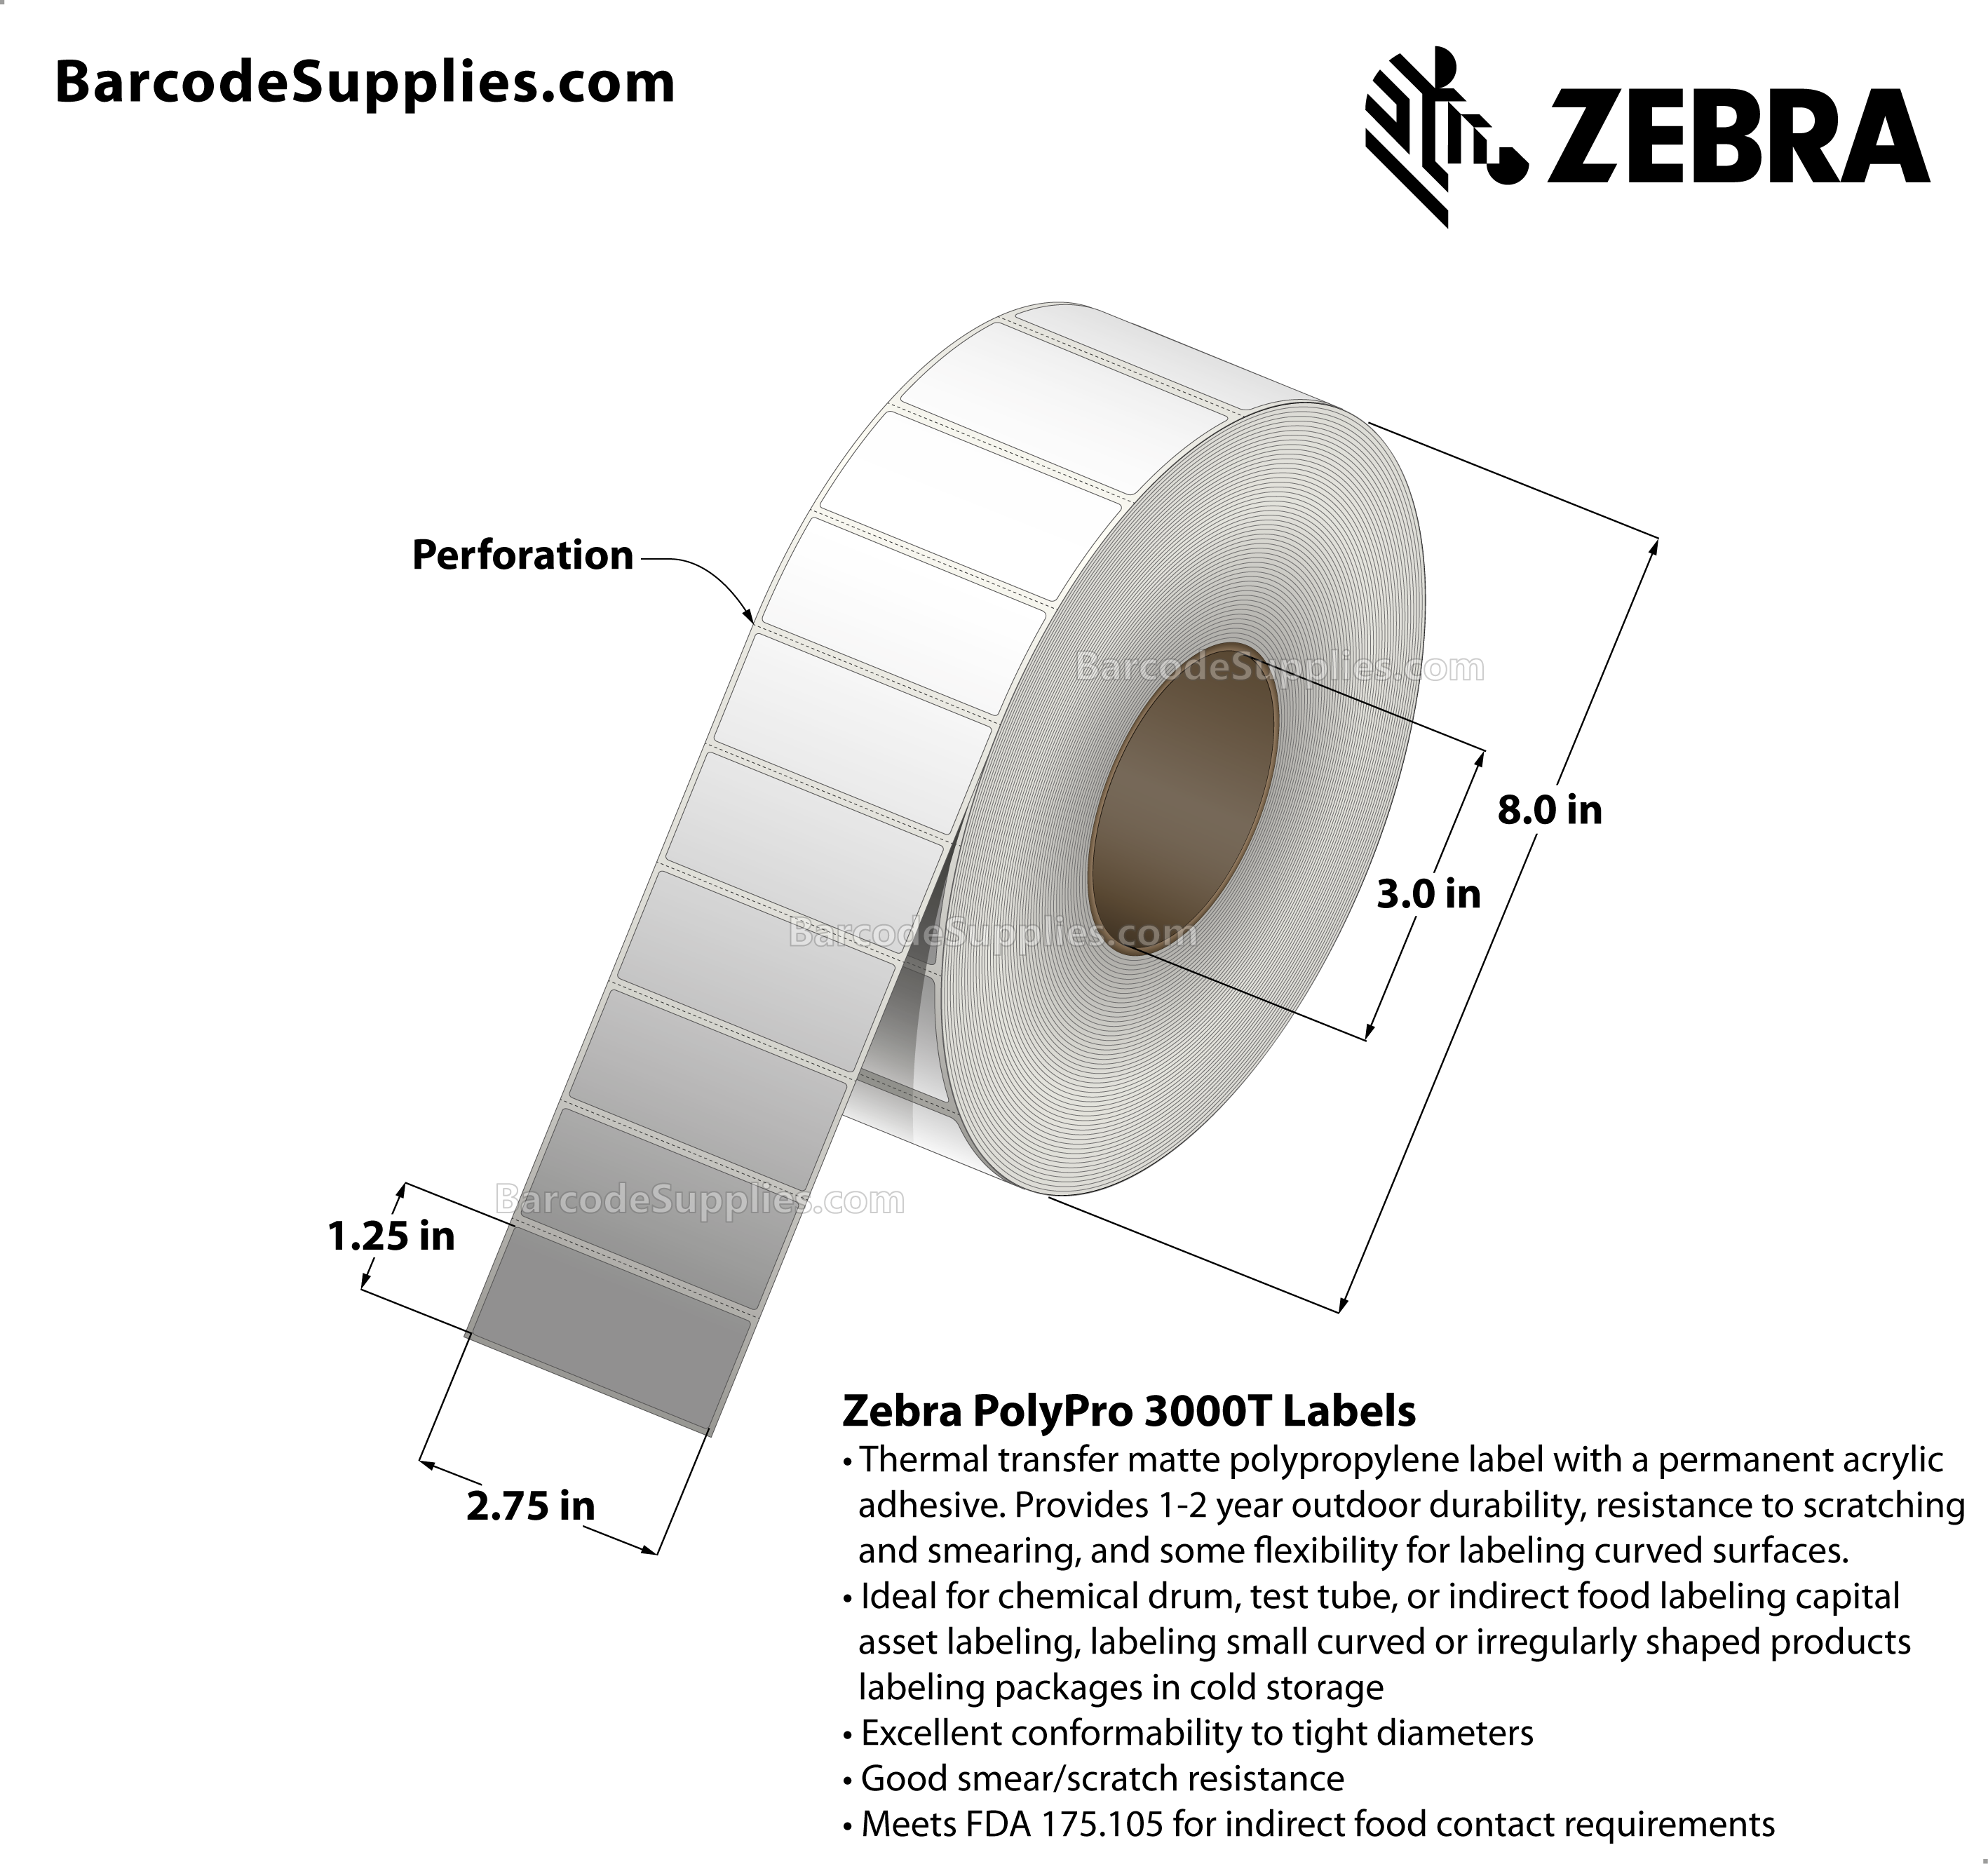 2.75 x 1.25 Thermal Transfer White PolyPro 3000T Labels With Permanent Adhesive - Perforated - 3923 Labels Per Roll - Carton Of 4 Rolls - 15692 Labels Total - MPN: 10011989